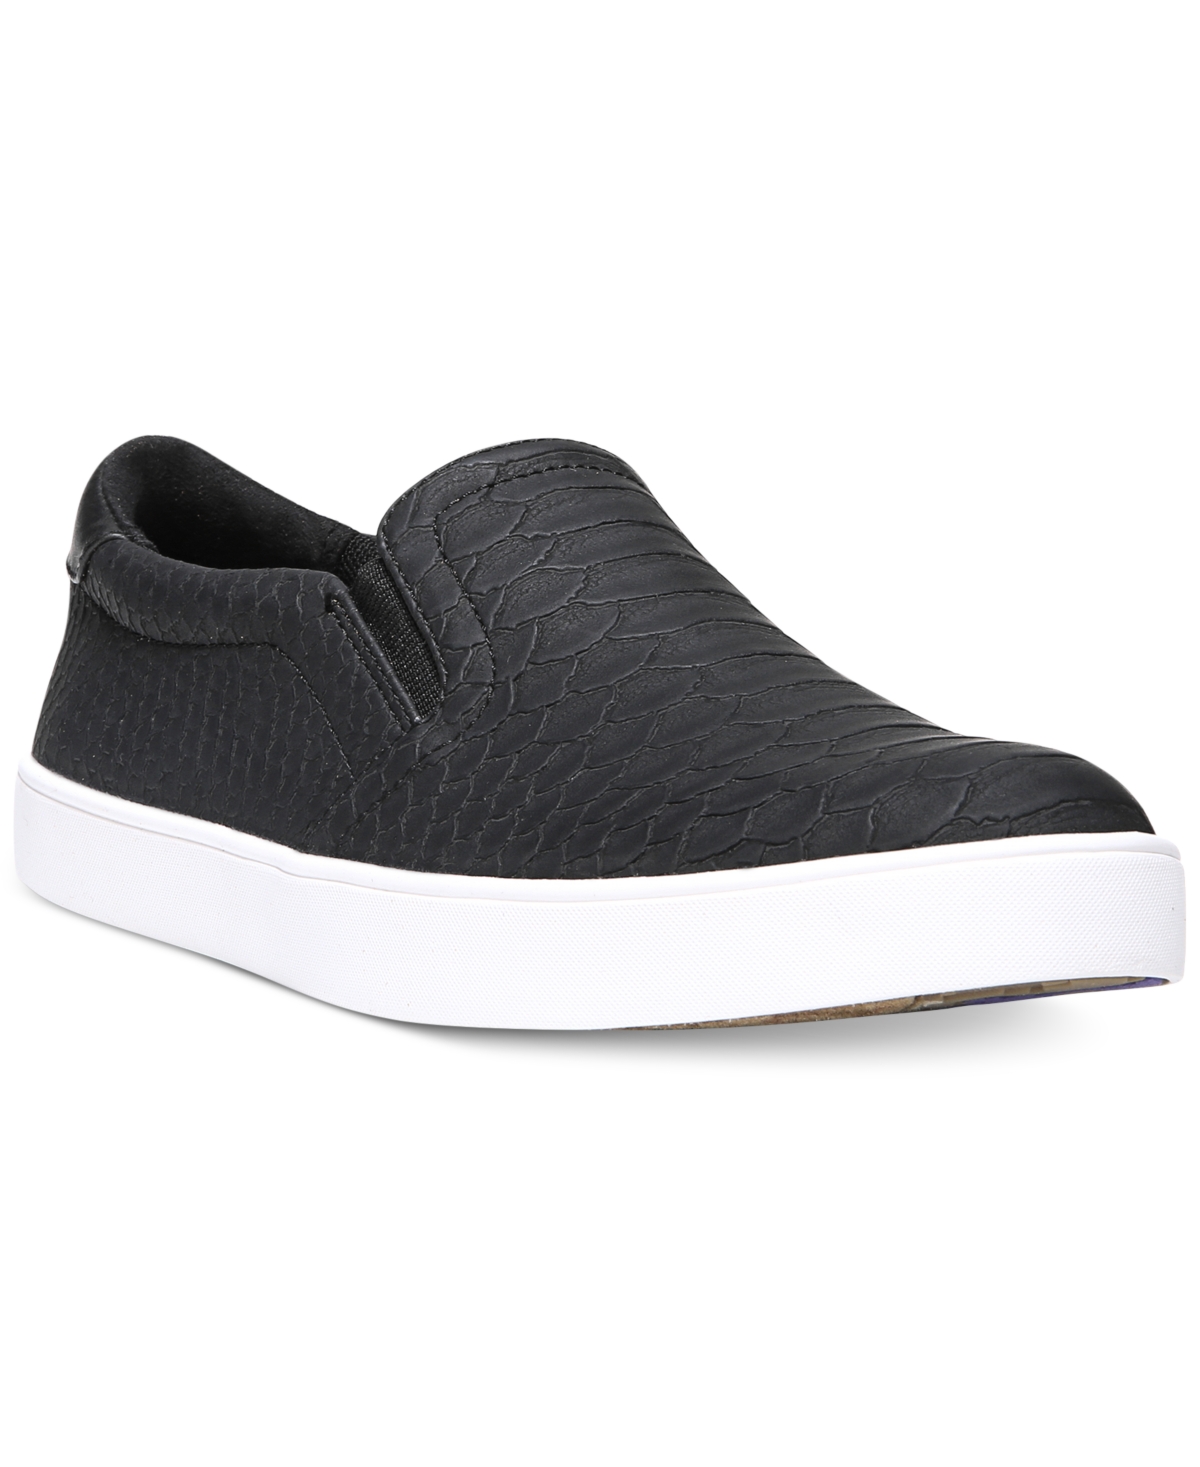 UPC 727679380225 product image for Dr. Scholl's Women's Madison Slip on Sneakers Women's Shoes | upcitemdb.com